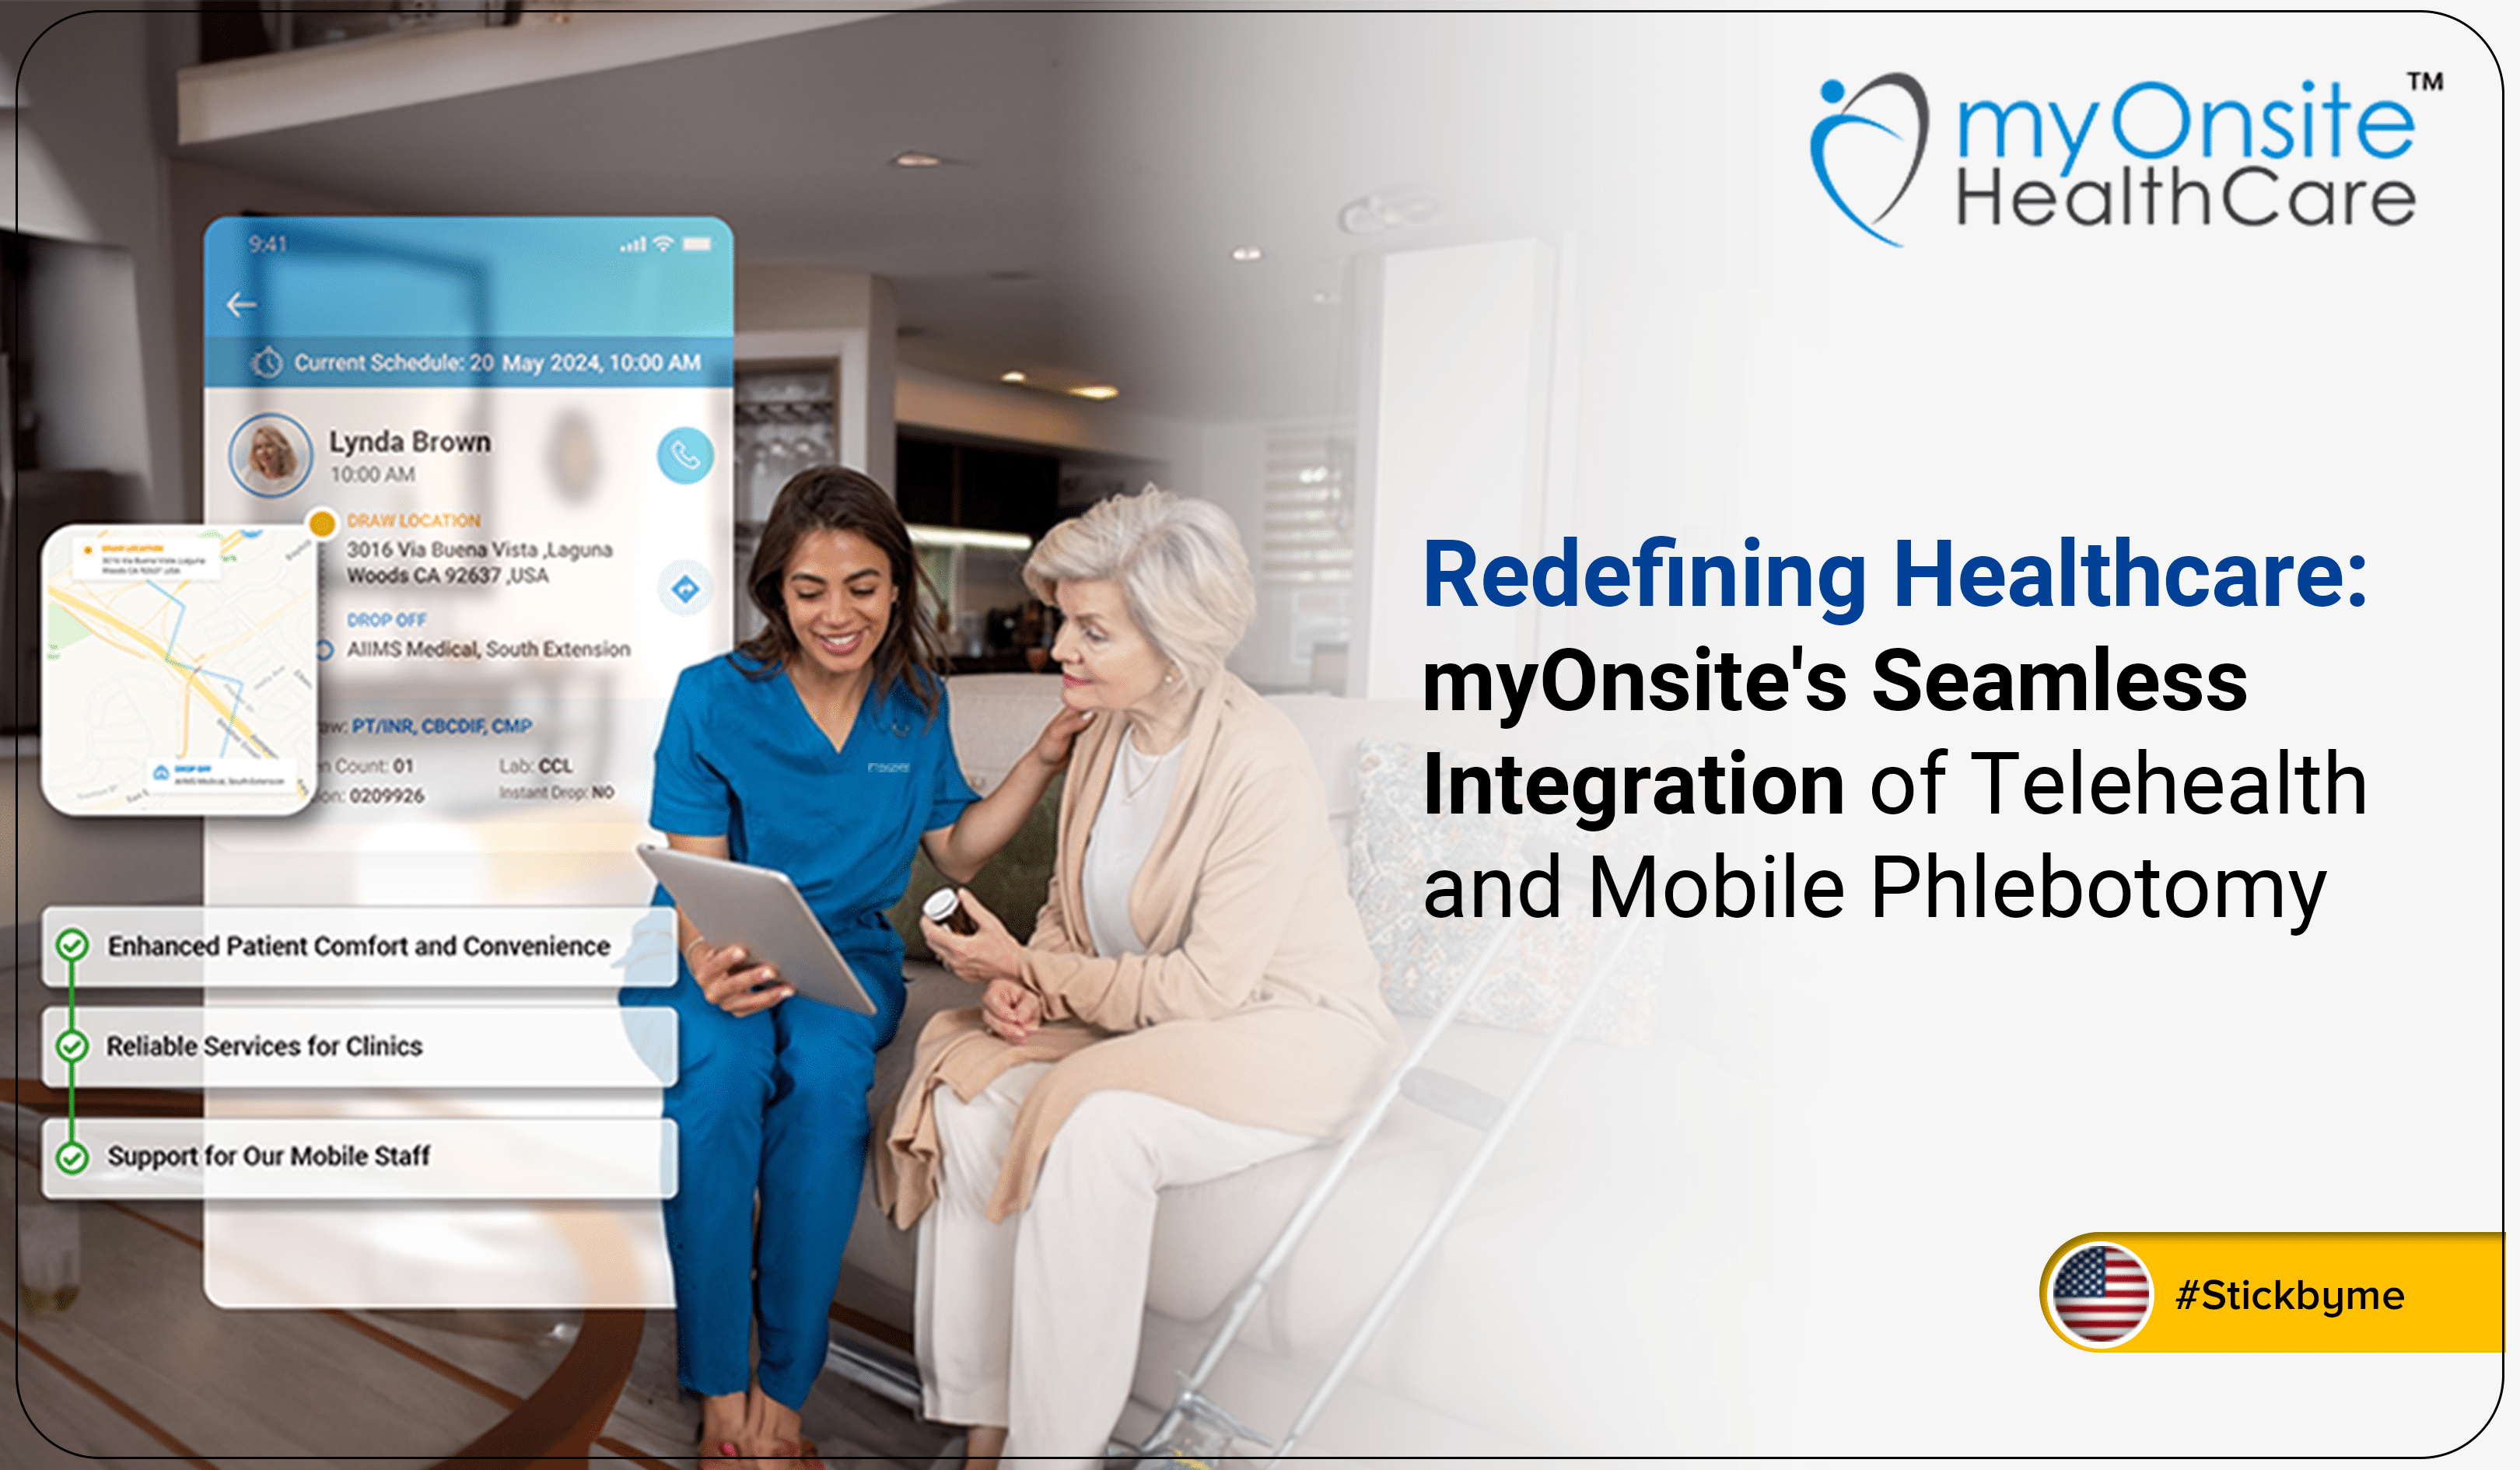 Redefining Healthcare: myOnsite’s Seamless Integration of Telehealth and Mobile Phlebotomy